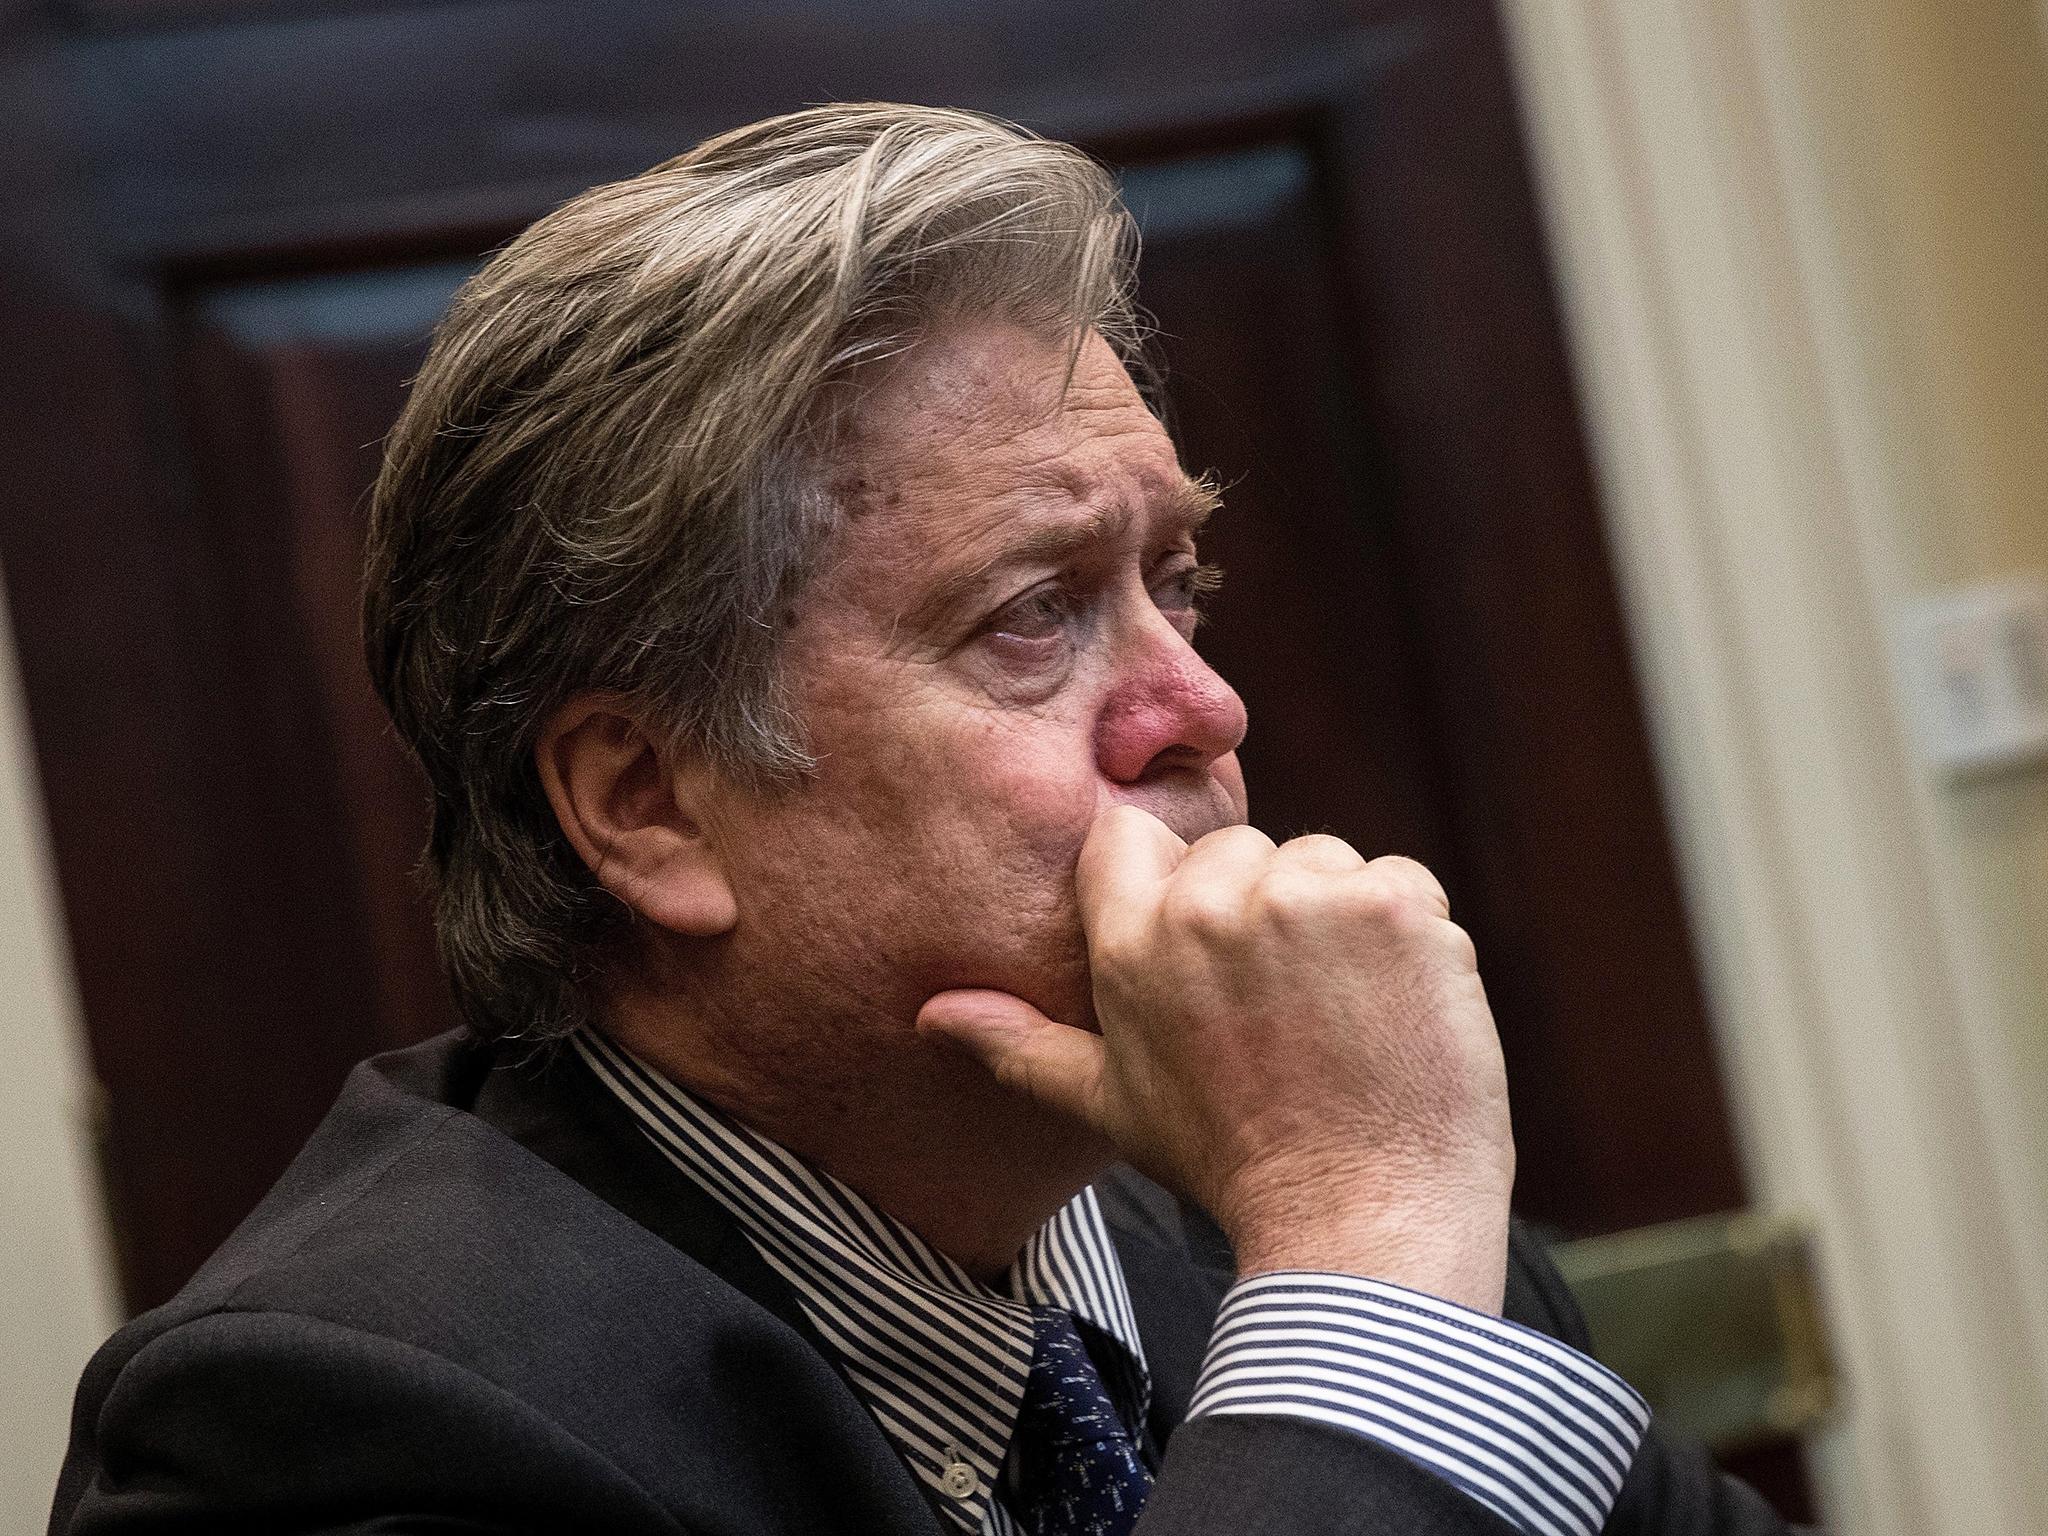 An interview where Steve Bannon, senior adviser to Donald Trump, prophesied a looming conflict has resurfaced